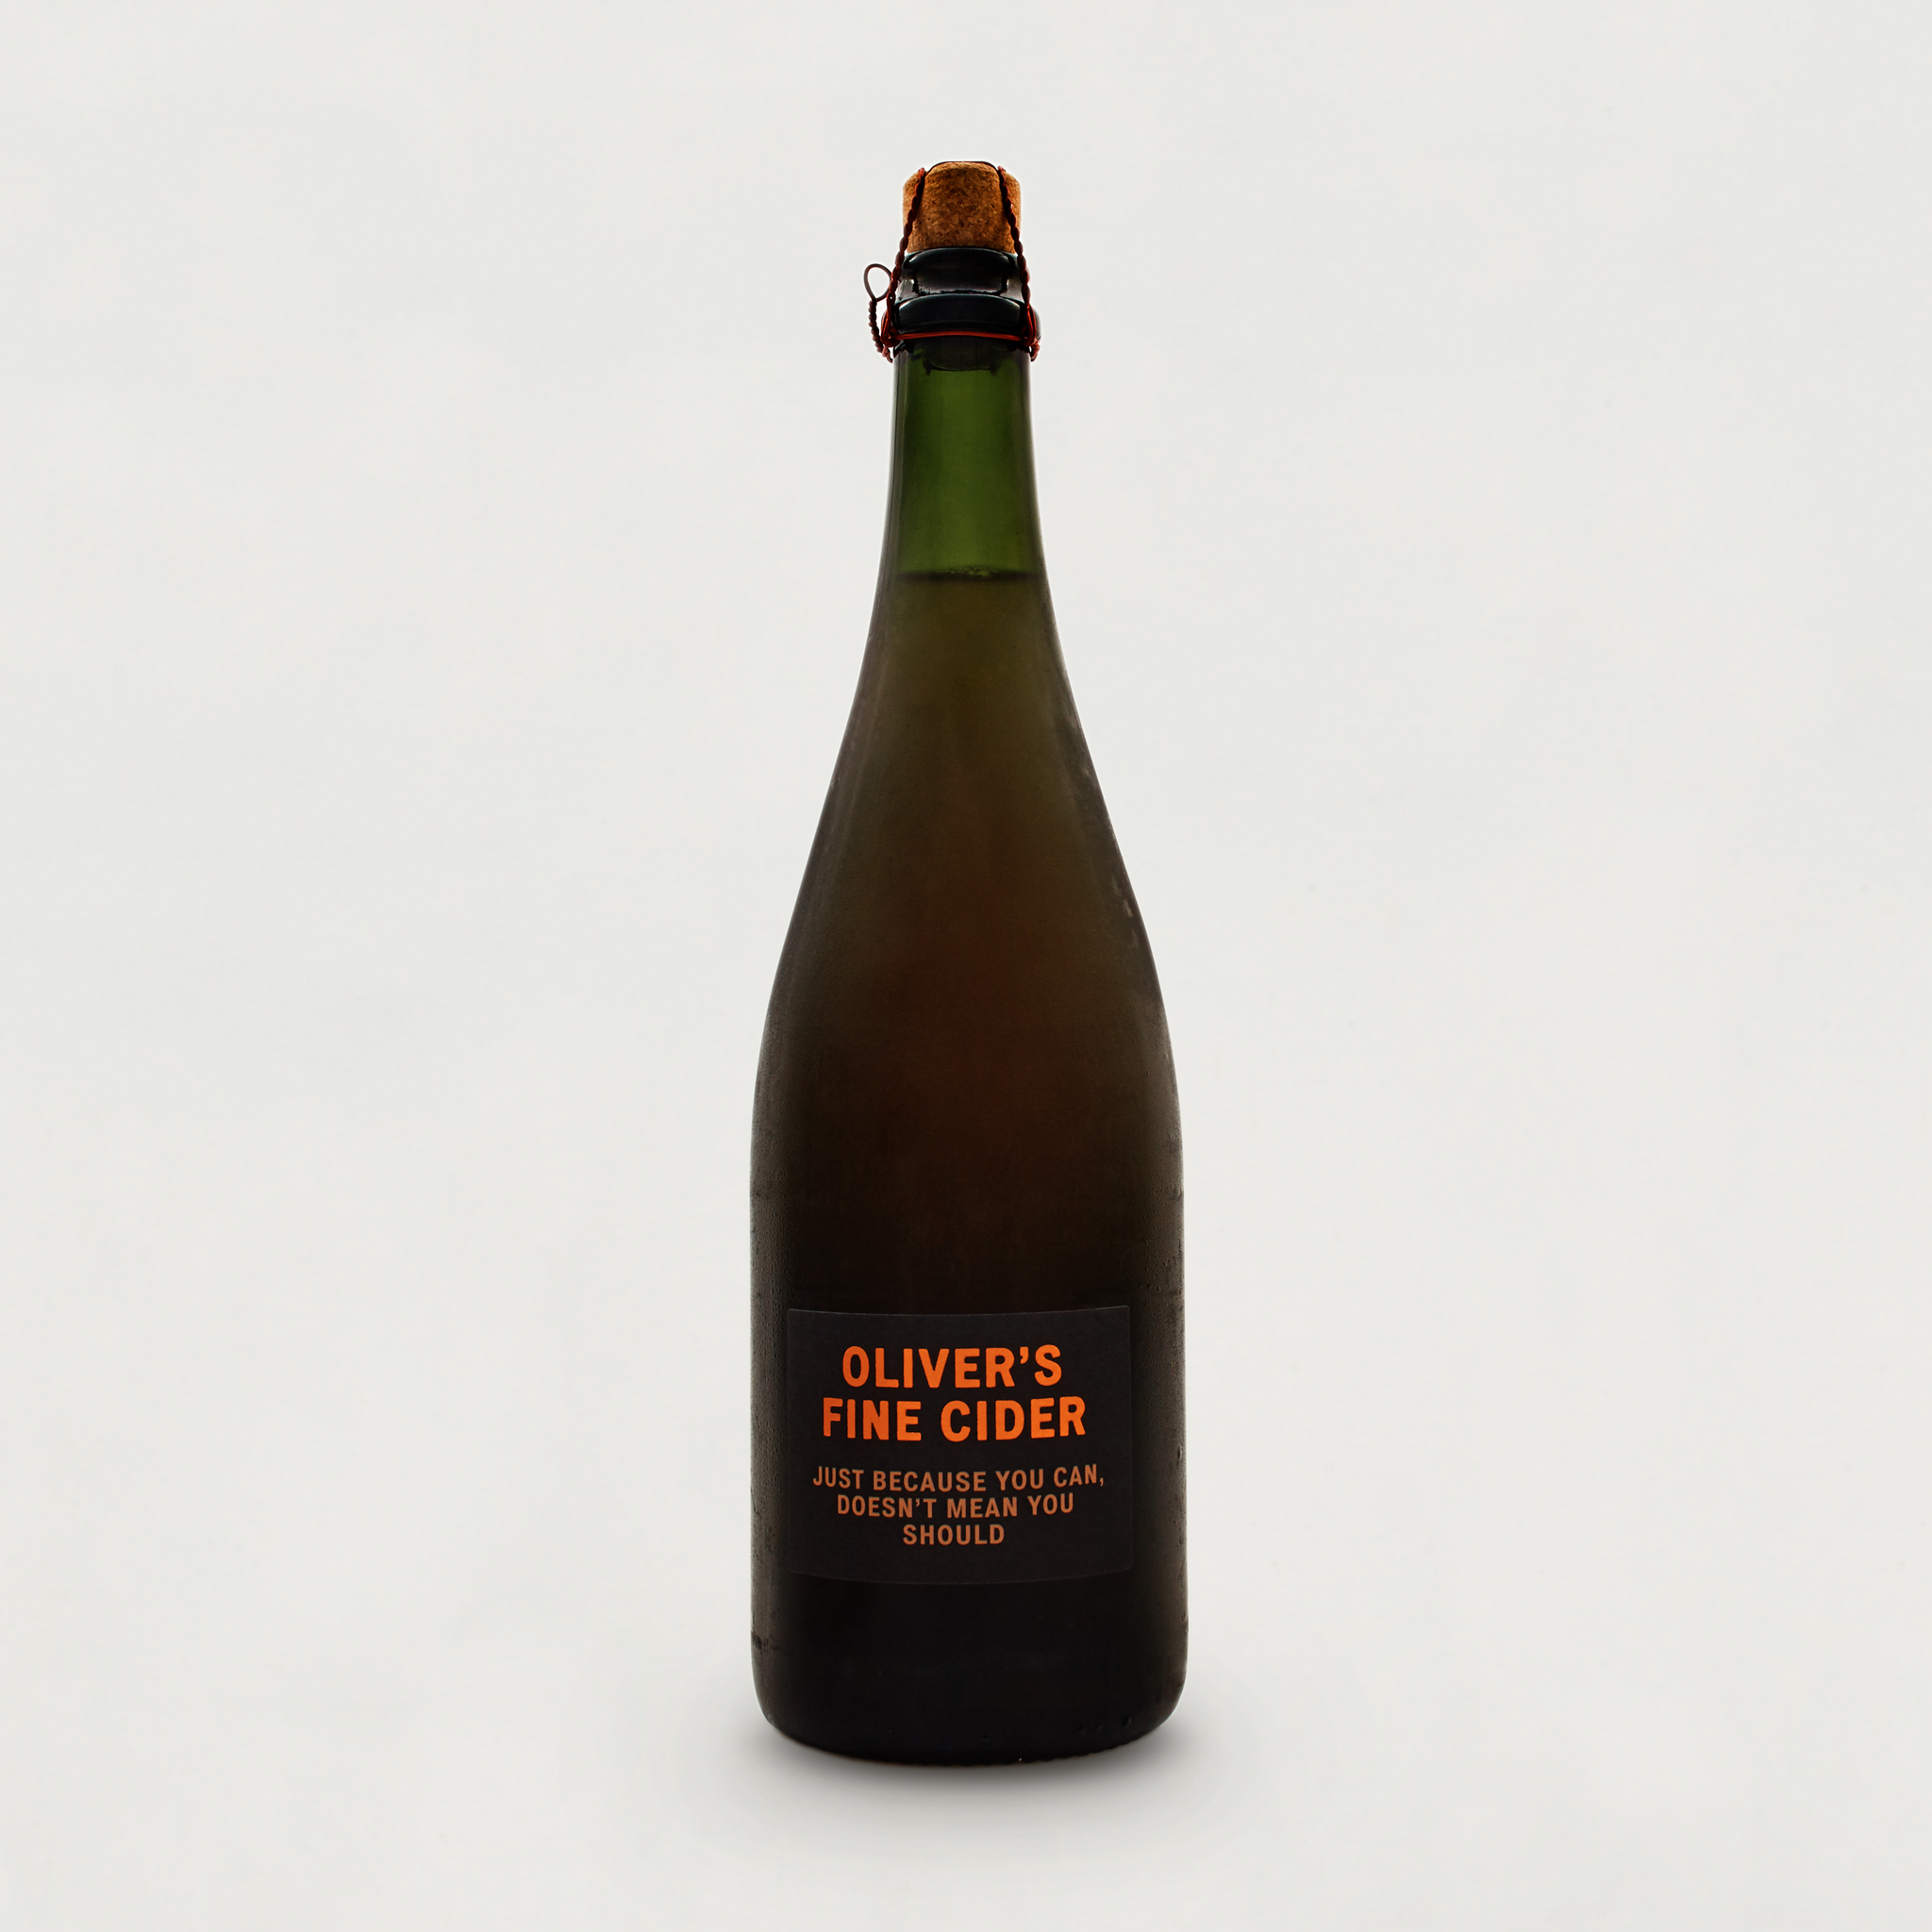 JUST BECAUSE YOU CAN DOESN'T MEAN YOU SHOULD-A BOTTLE CONDITIONED CIDER (750ml) 5.7%